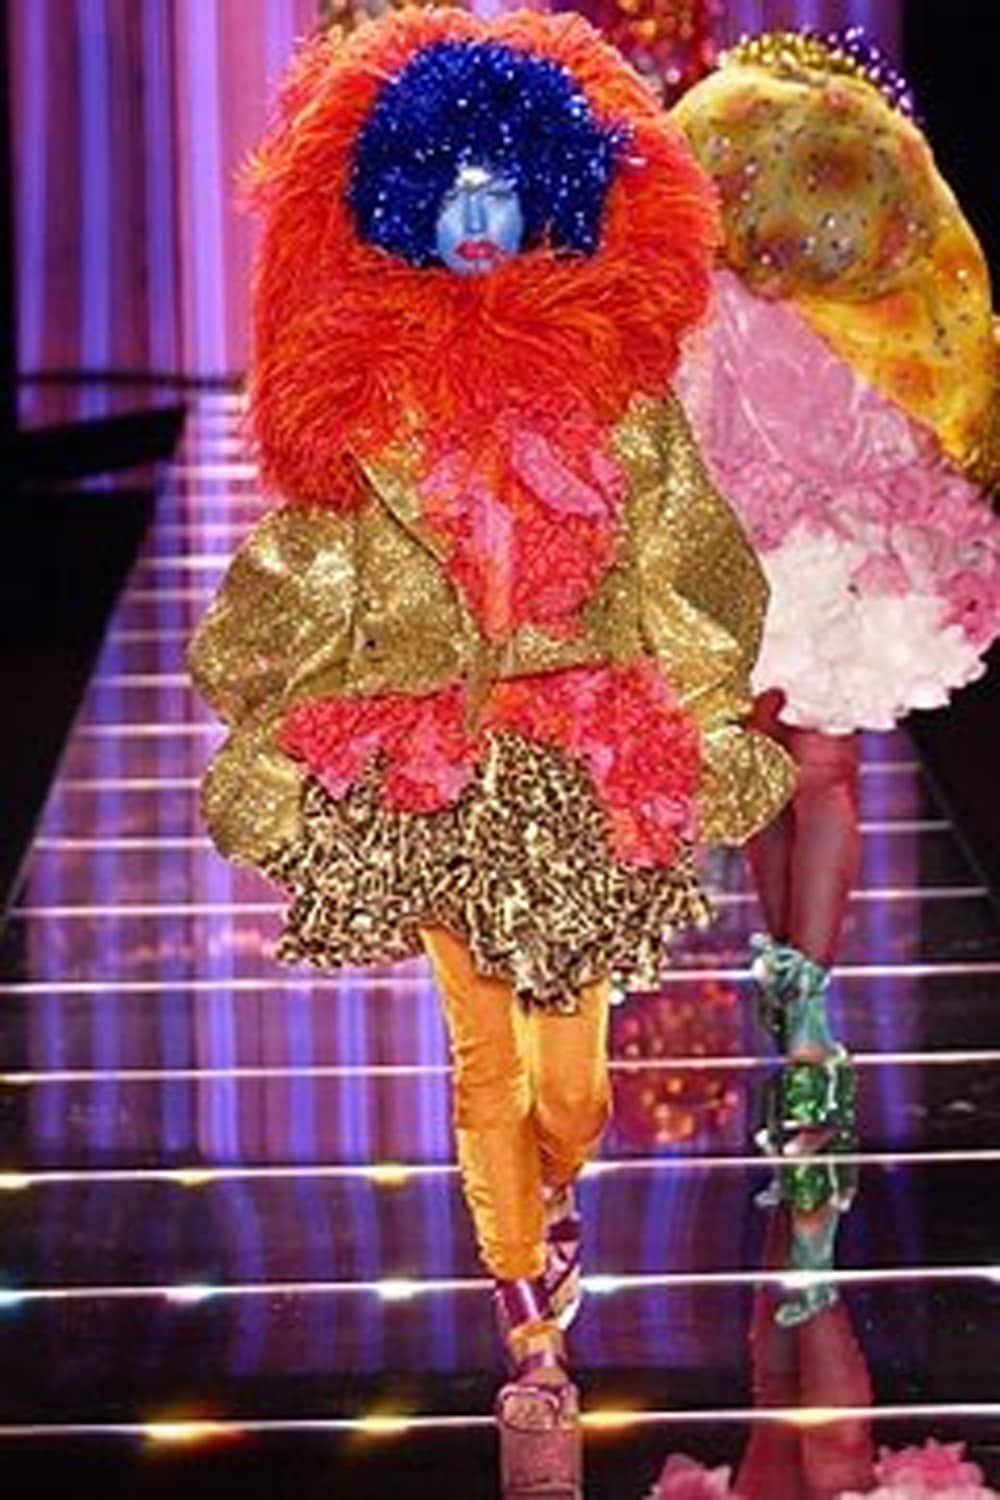 JOHN GALLIANO READY-TO-WEAR SPRING-SUMMER 2003. RUNWAY MAGAZINE ® Collections Special Selection “Fashion Treasure”. RUNWAY MAGAZINE ® Collections. RUNWAY NOW / RUNWAY NEW